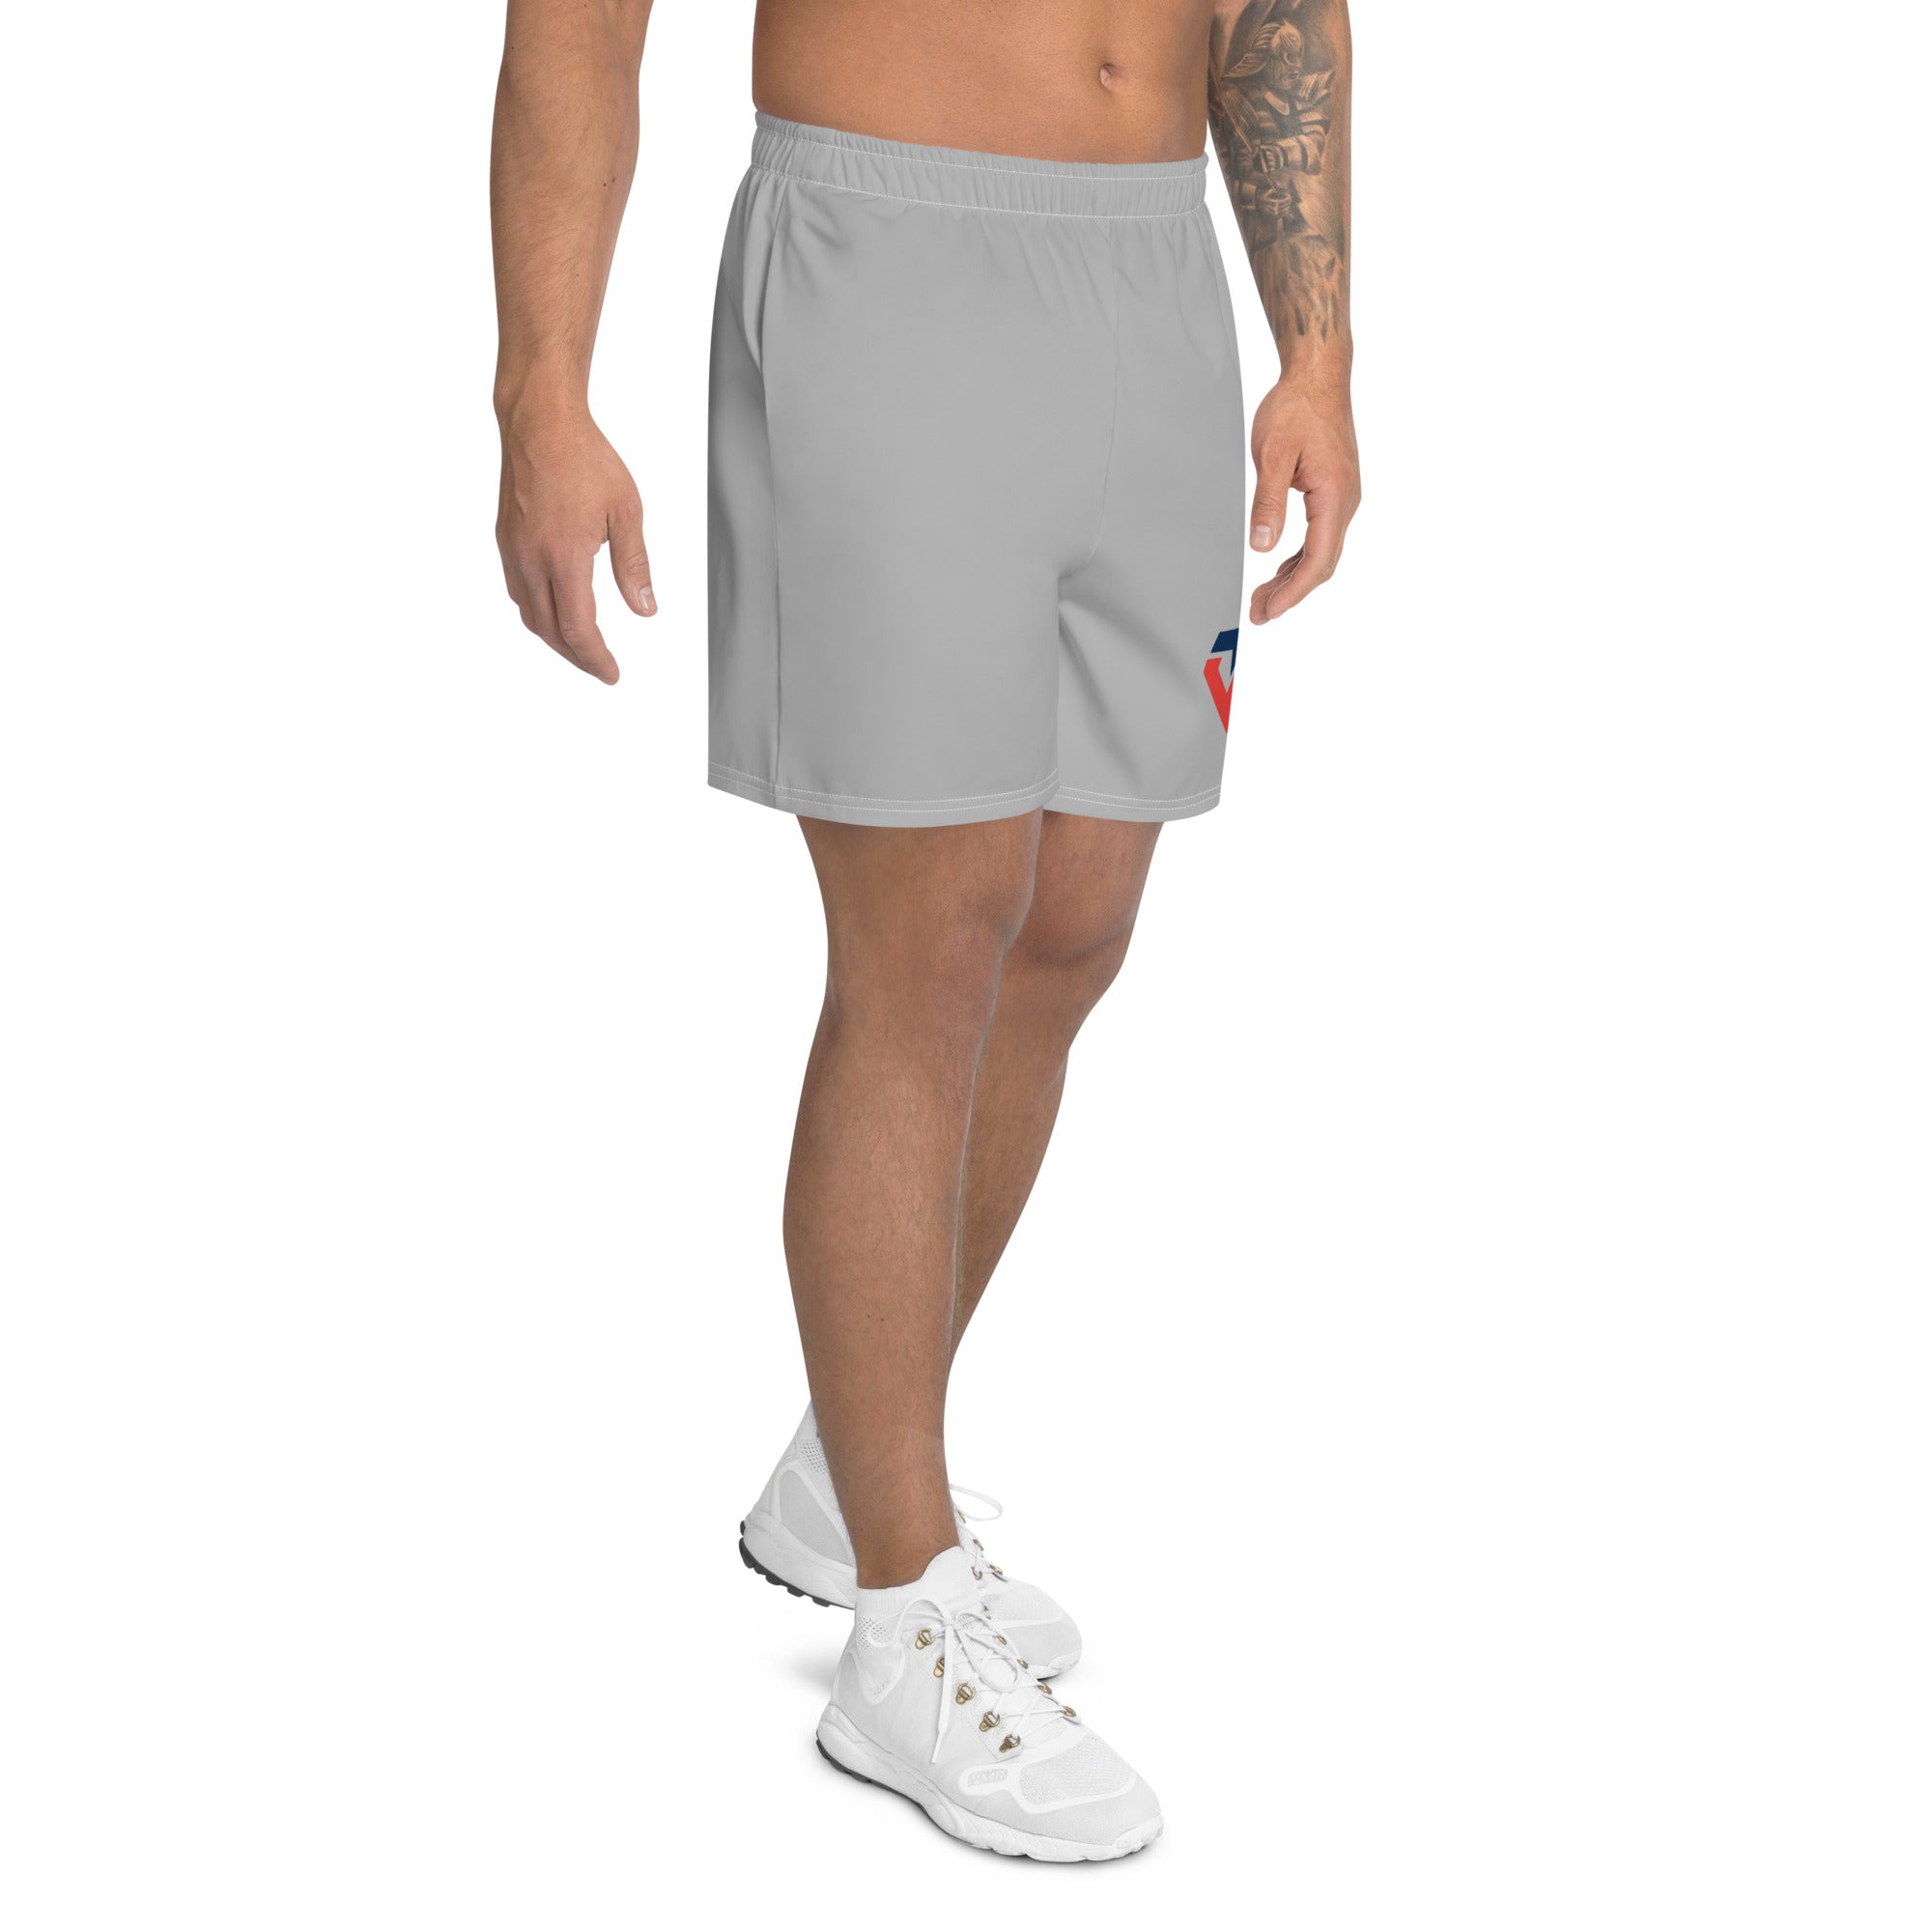 Tampa Warriors TW Seal Gray Men's Athletic Shorts